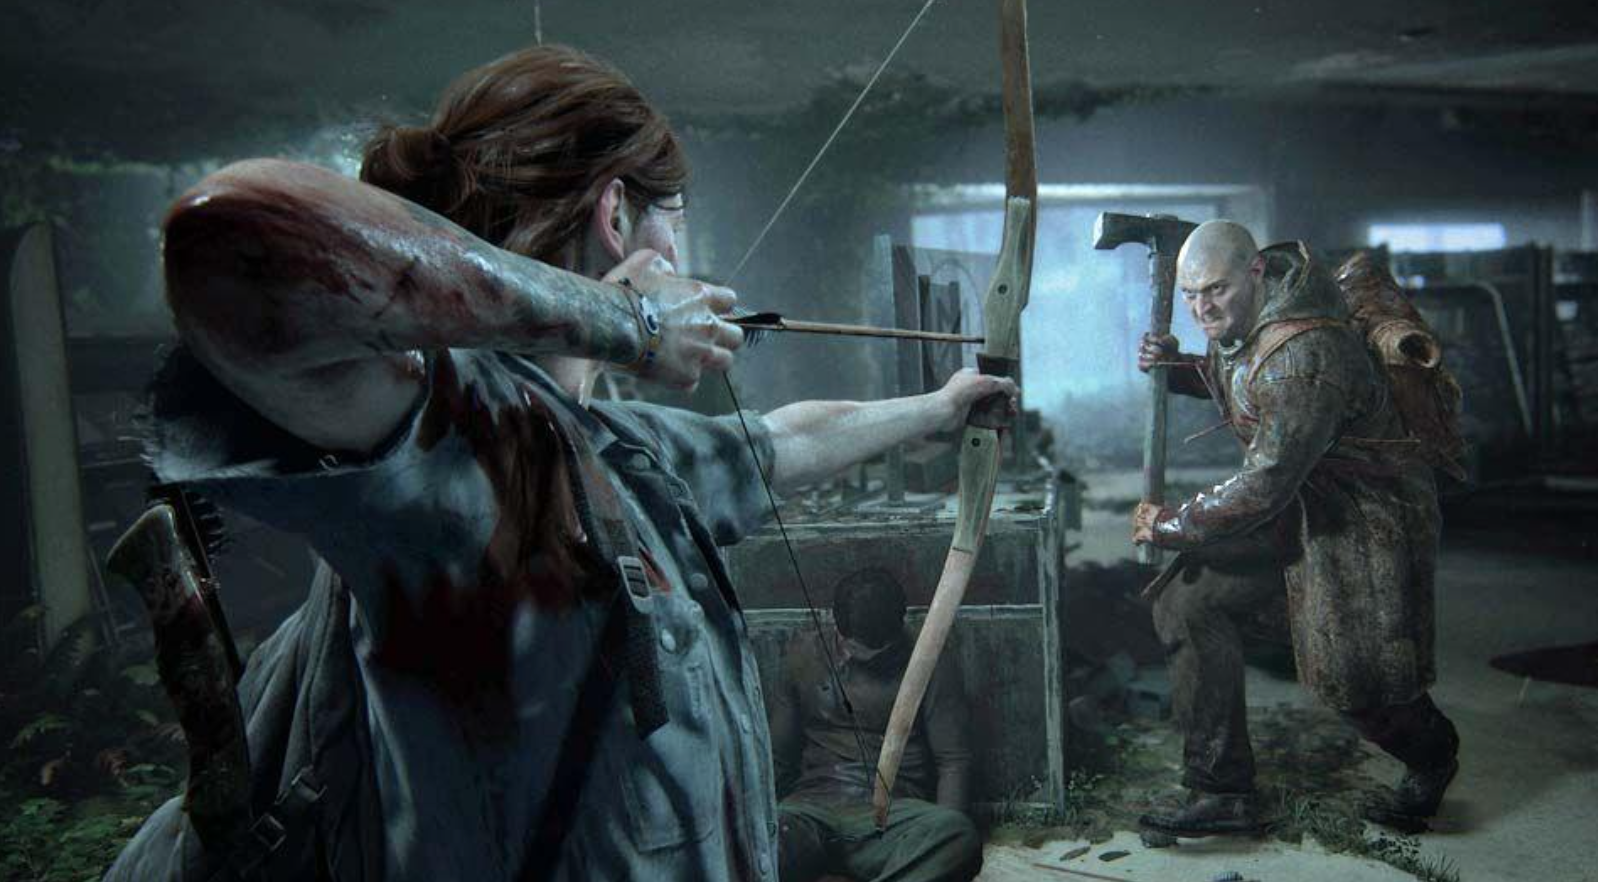 Ellie with her bow and arrow in Last of Us 2 